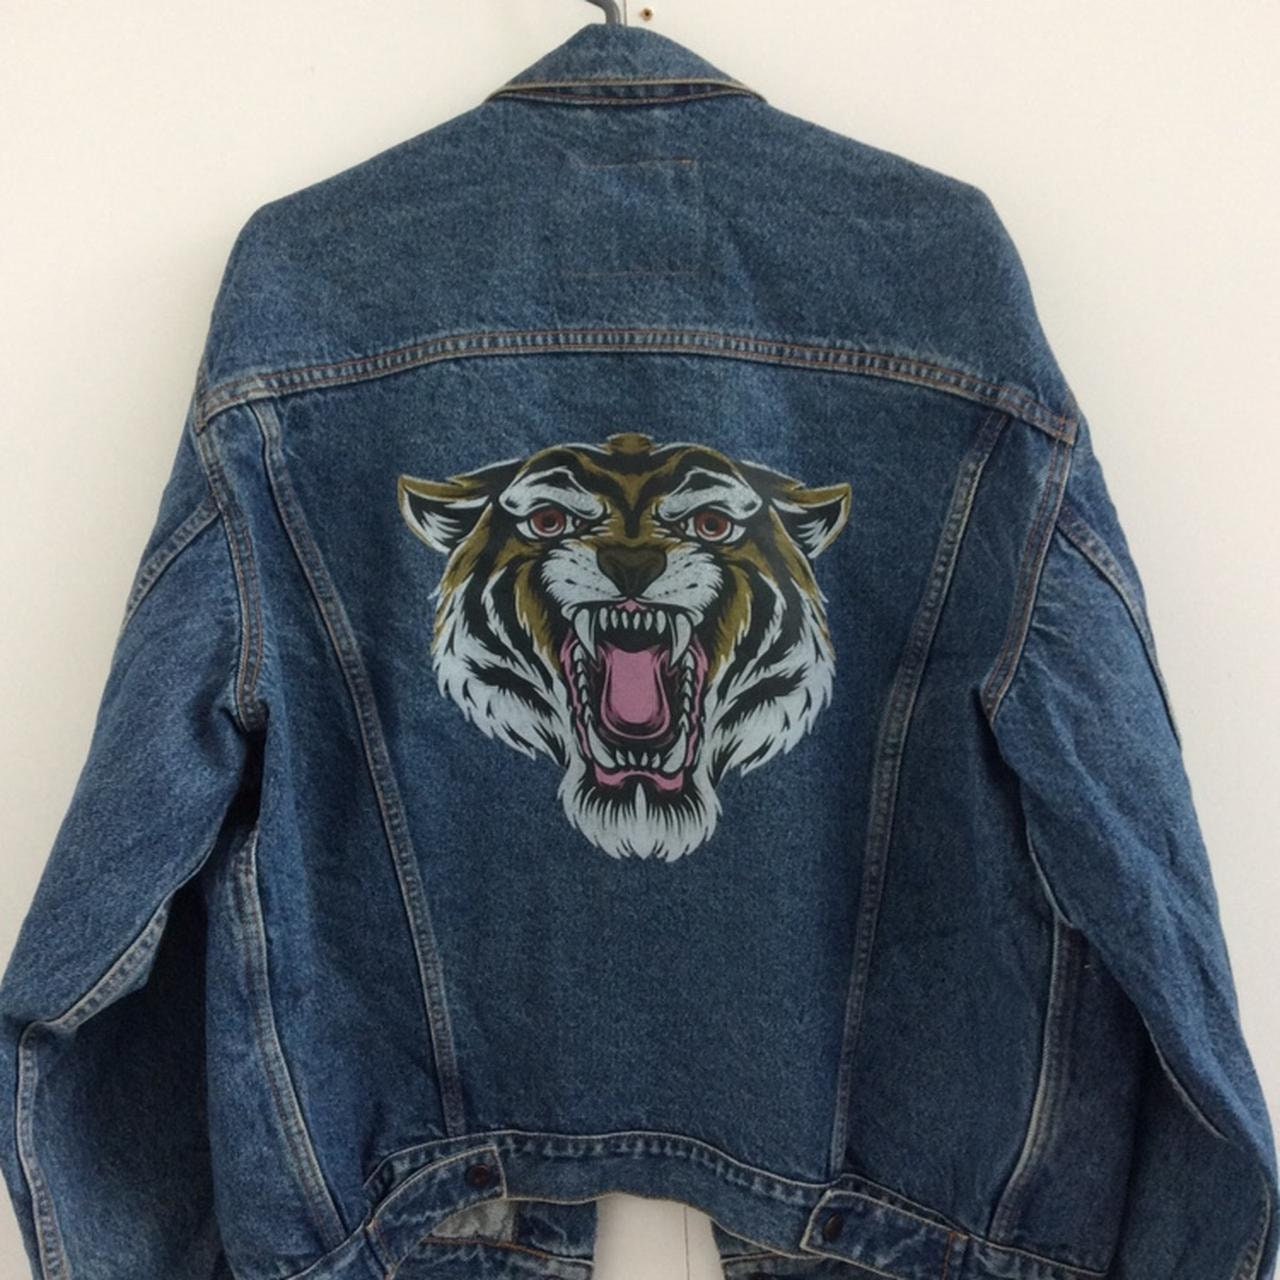 Vintage Jnco Jeans “Tiger Face” Shorts 90s Size 34 - www ...